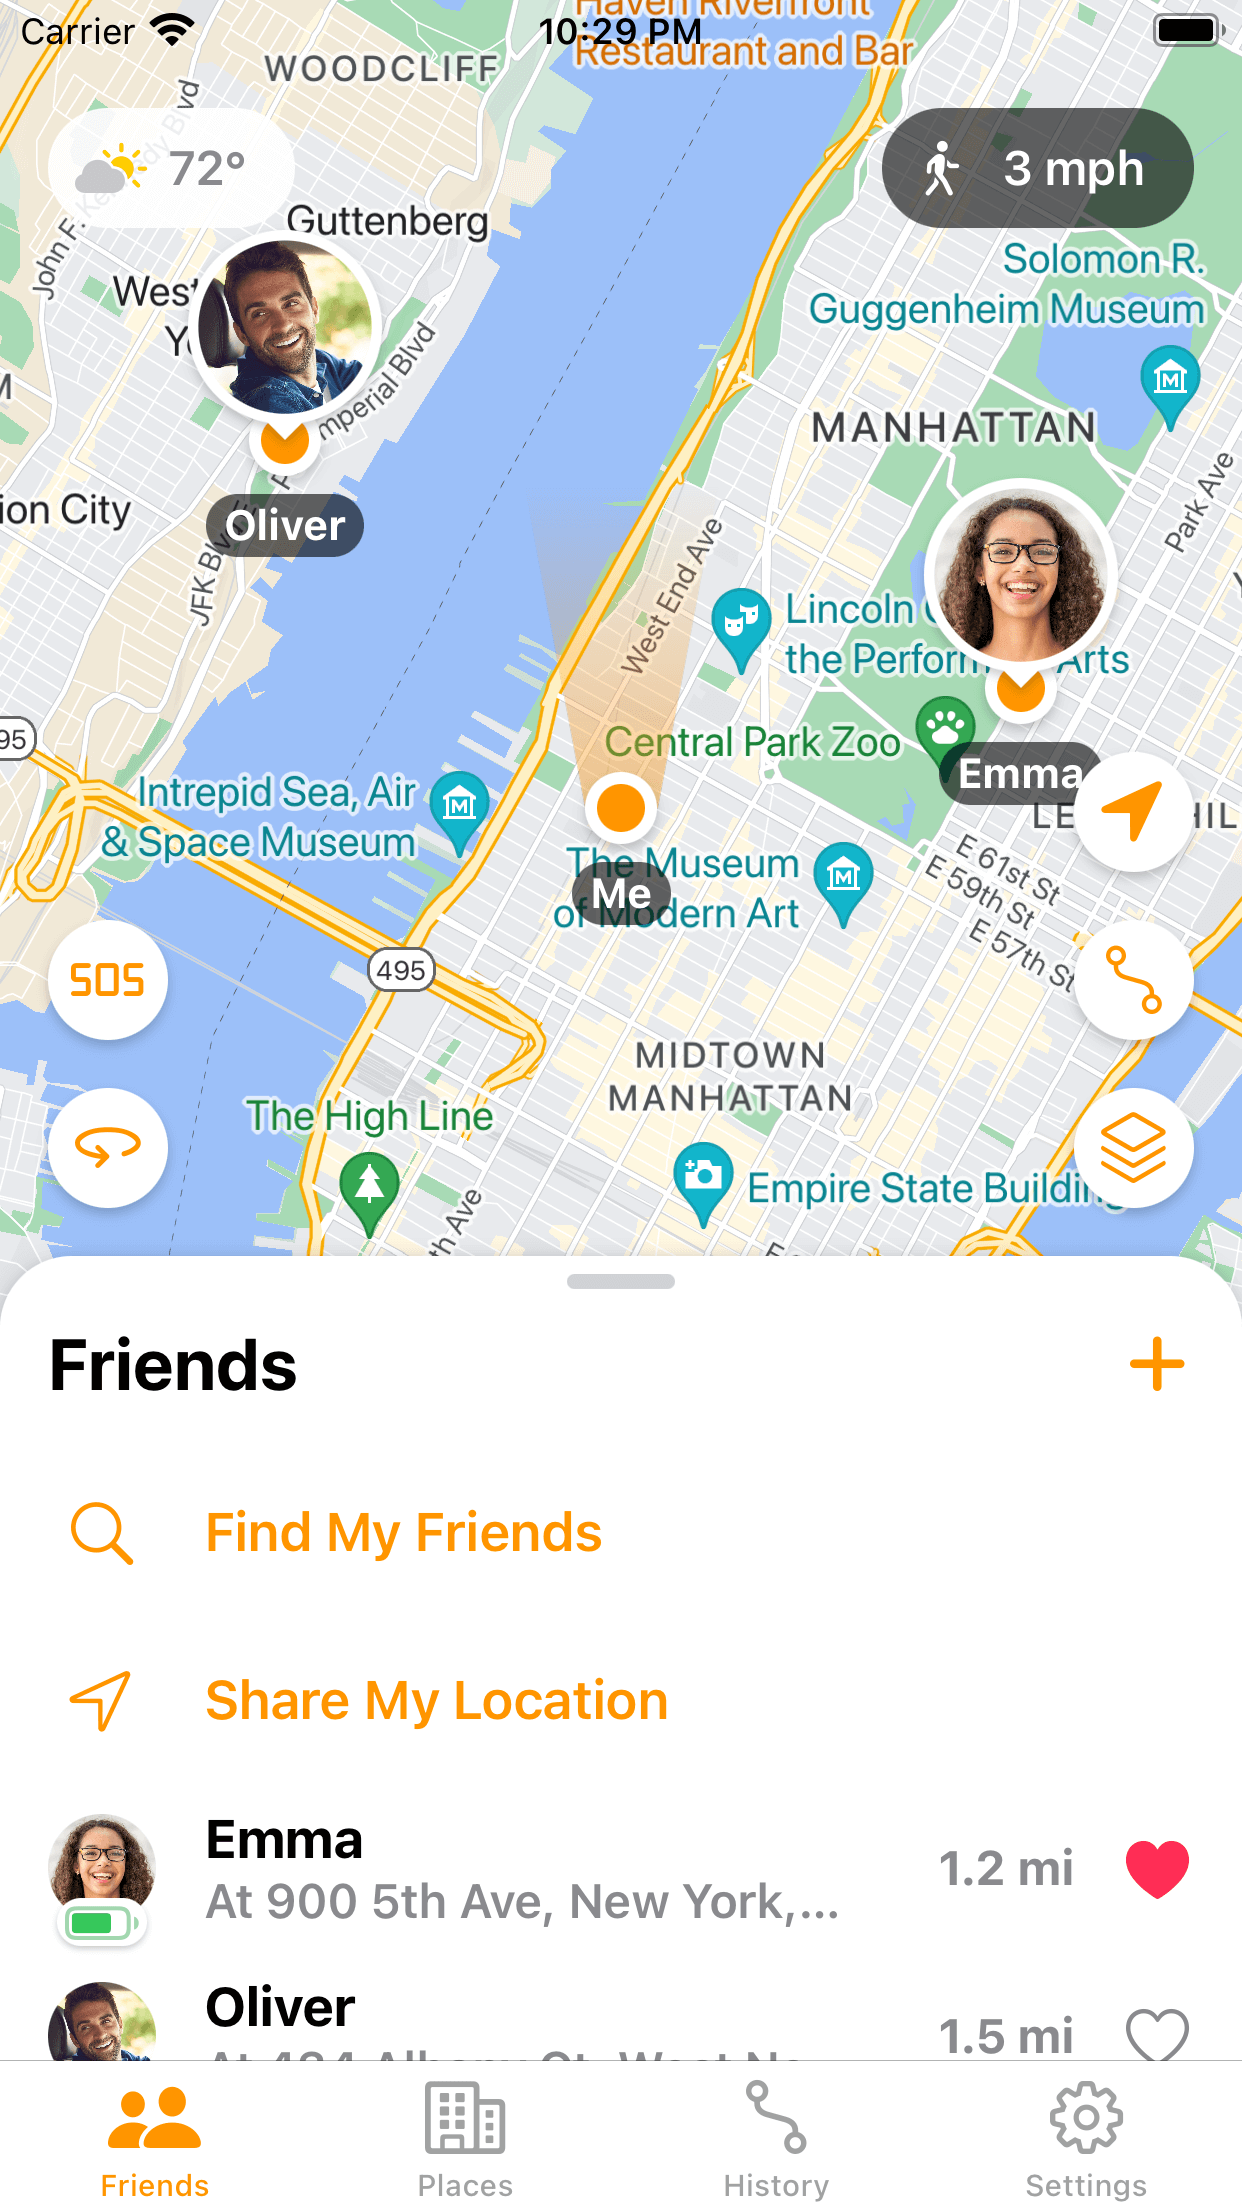 See all your friends and family on a map